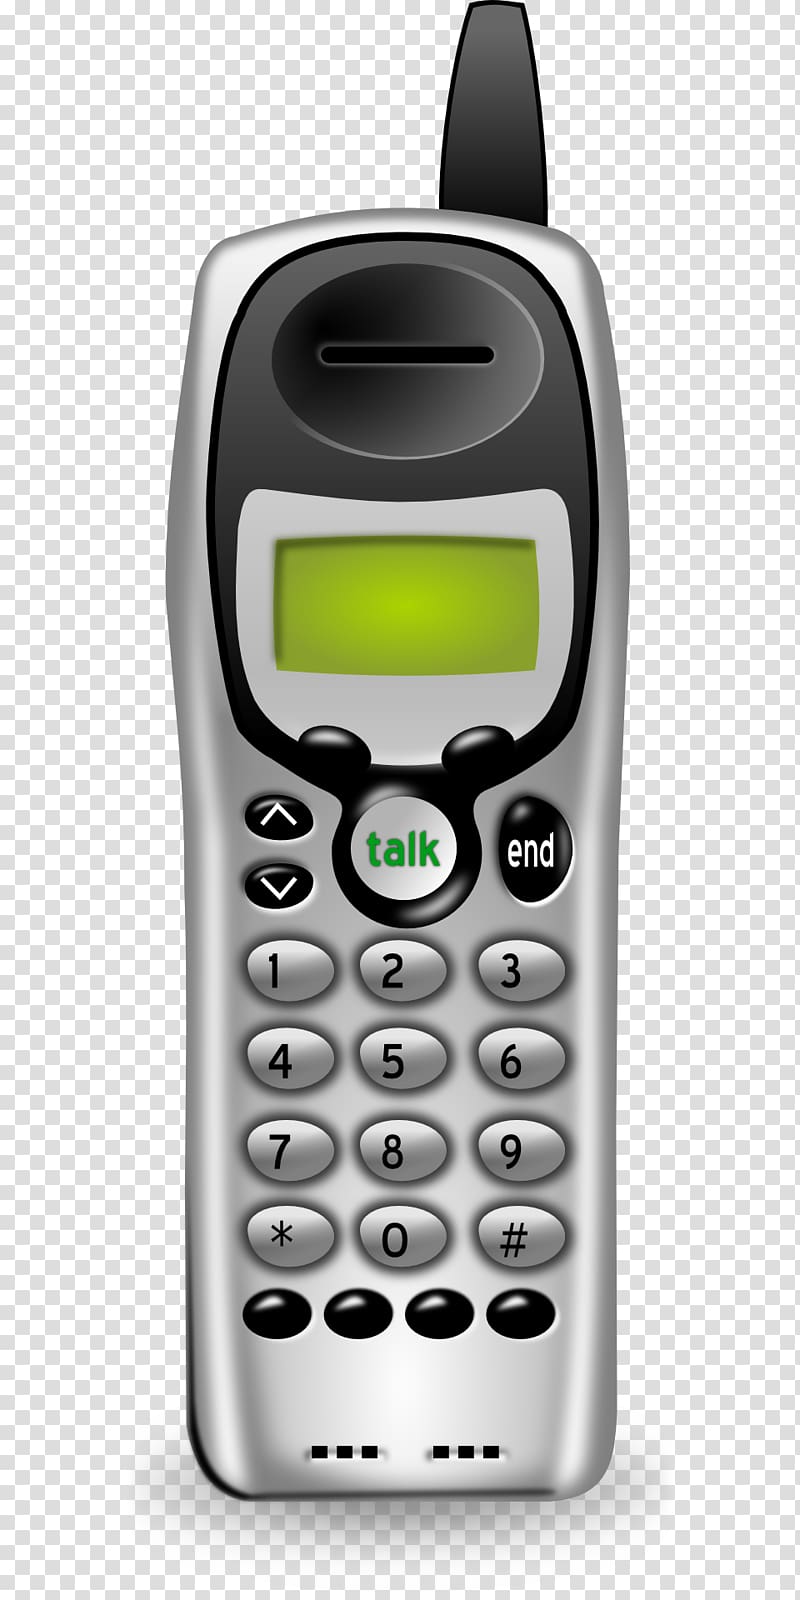 Cordless telephone Home & Business Phones Digital Enhanced Cordless Telecommunications , Iphone transparent background PNG clipart